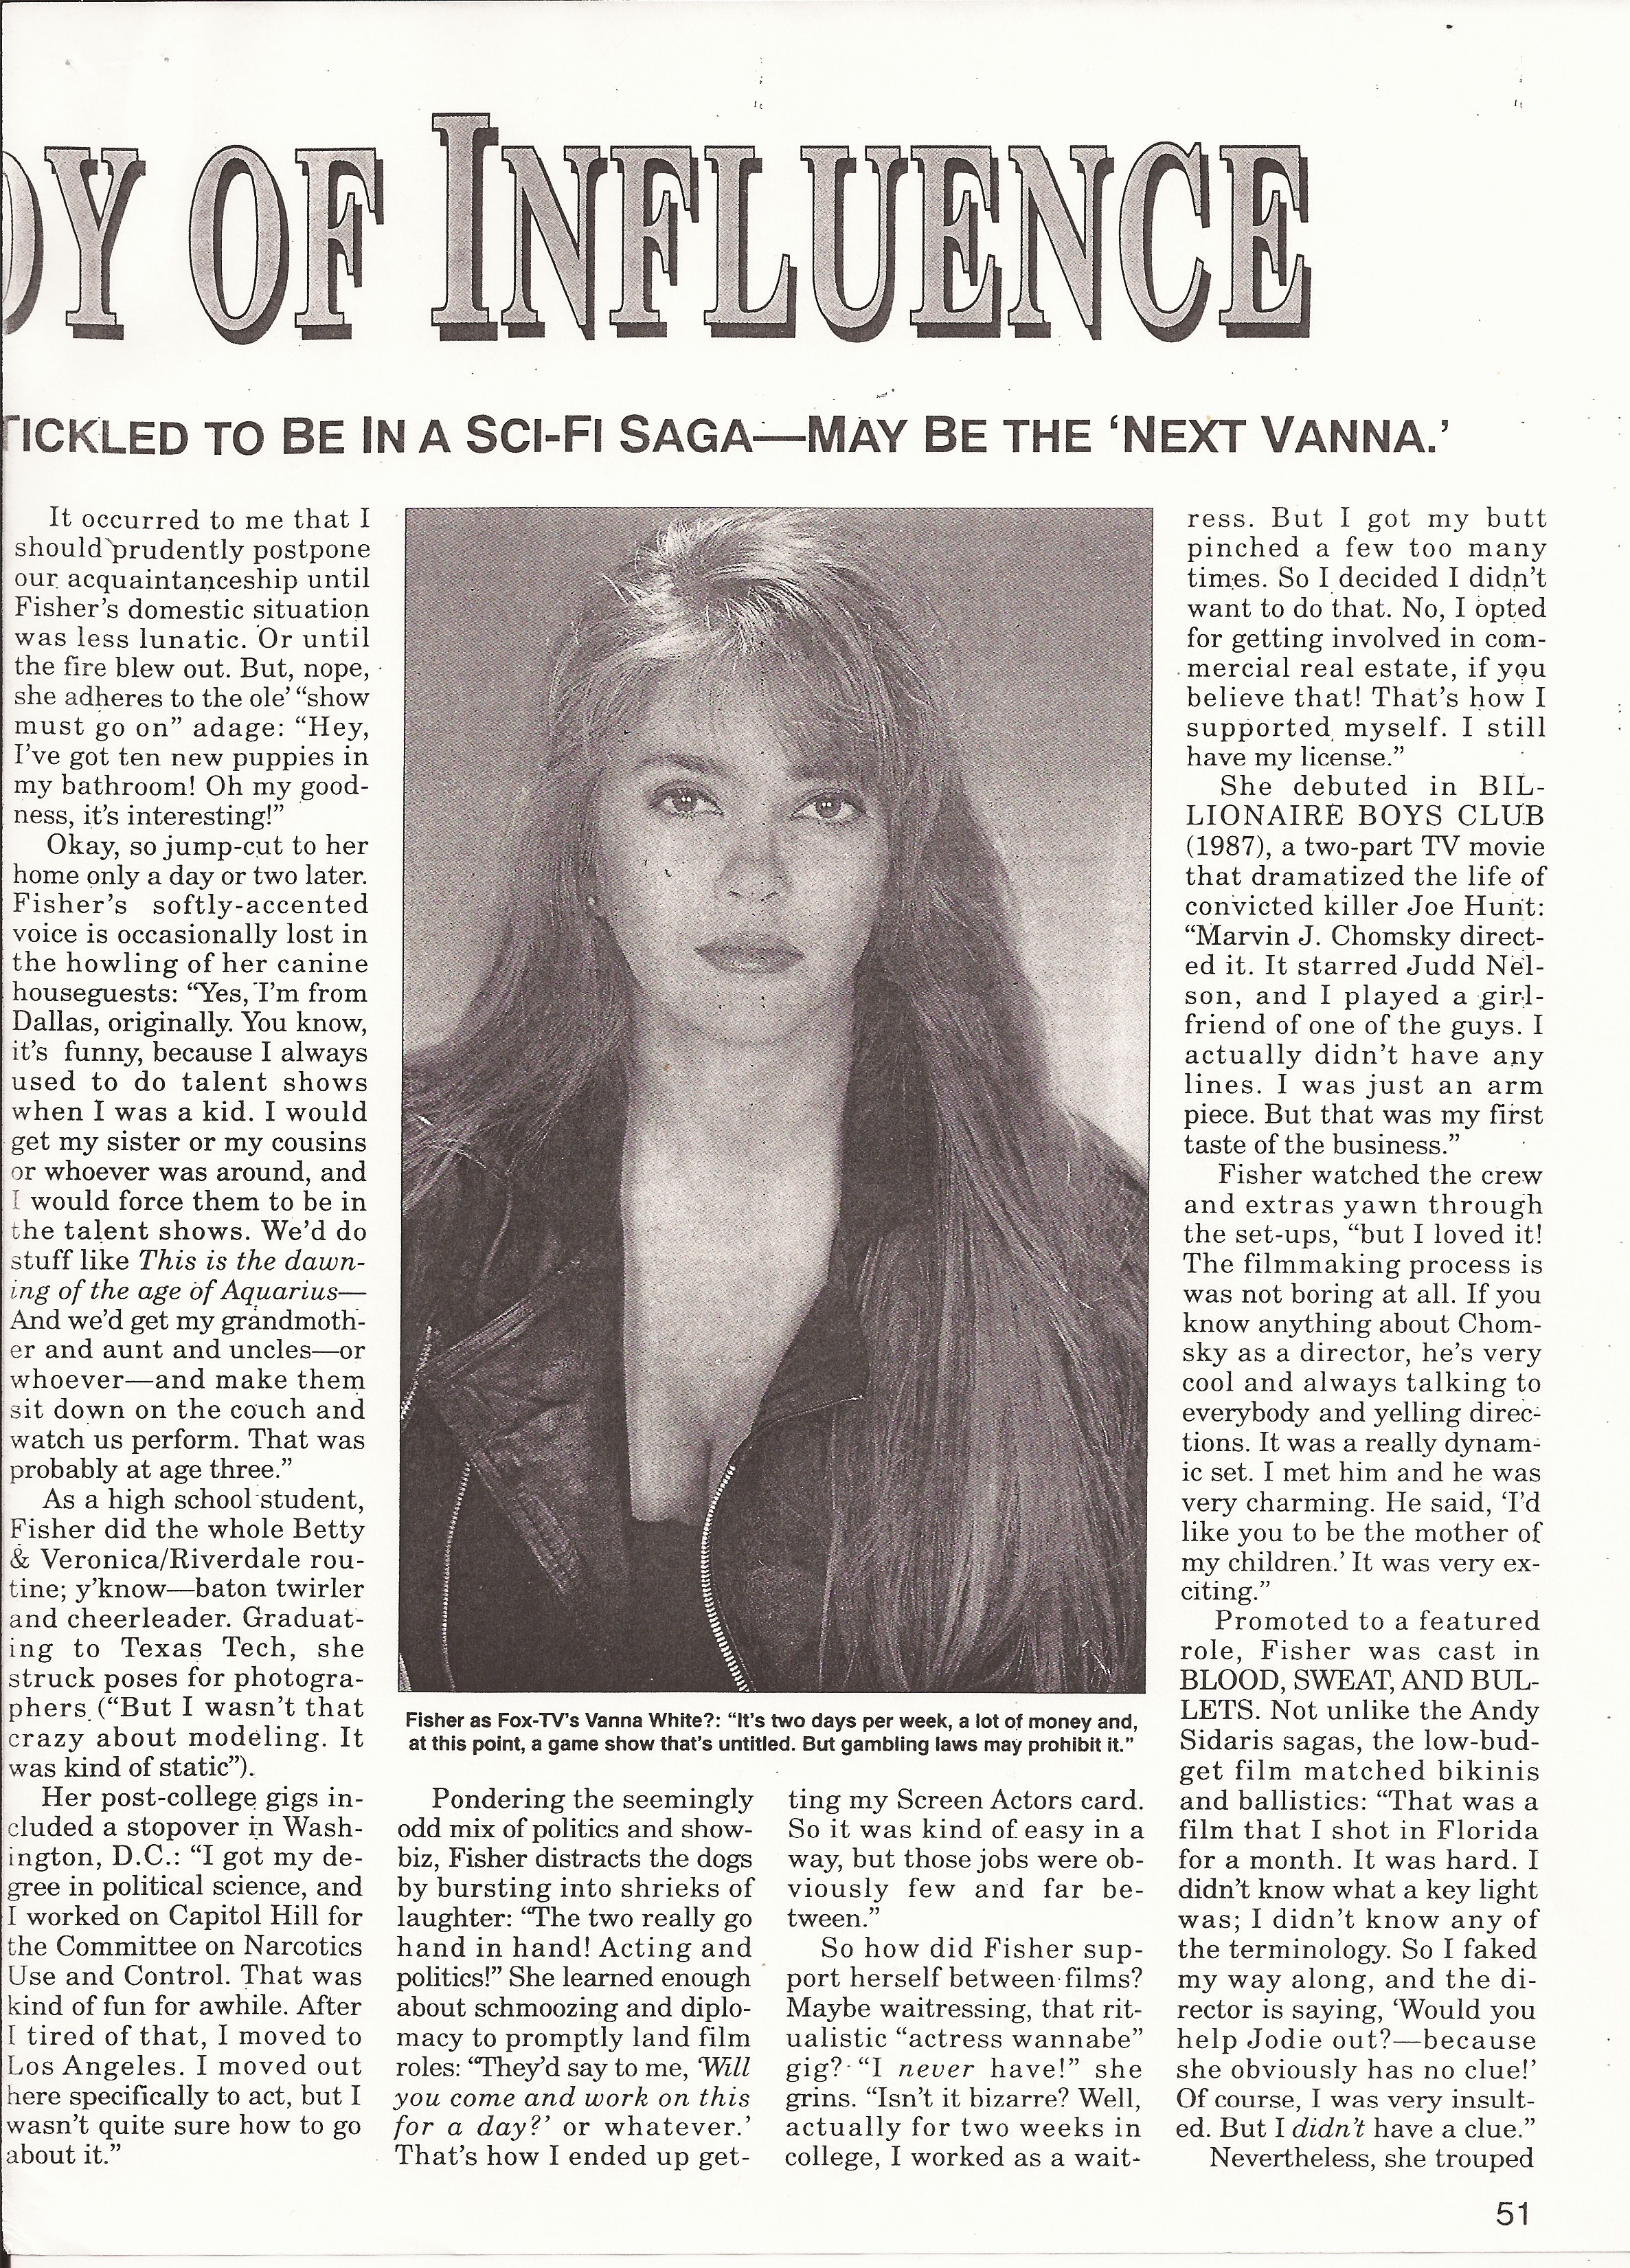 Article from Femmes Fatales Magazine - 2004